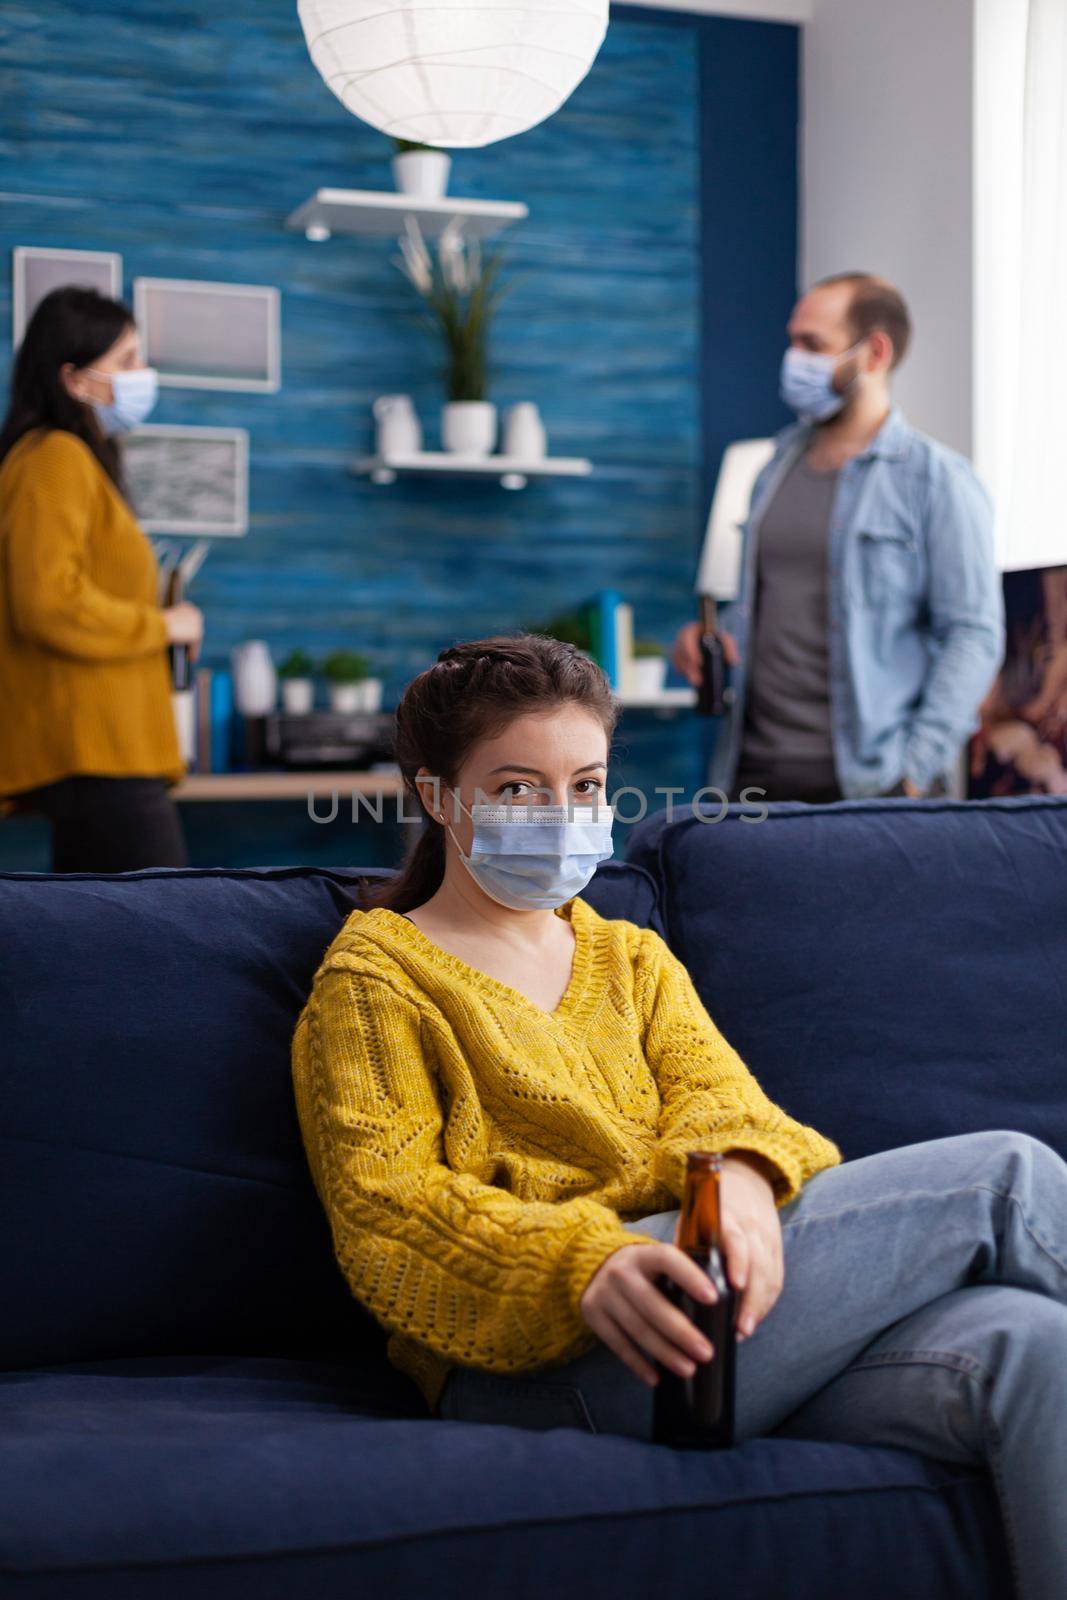 Happy young woman relaxing with friends sitting on couch wearing face mask as prevention against spreading coronavirus during global pandemic holding beer bottle looking at camera.